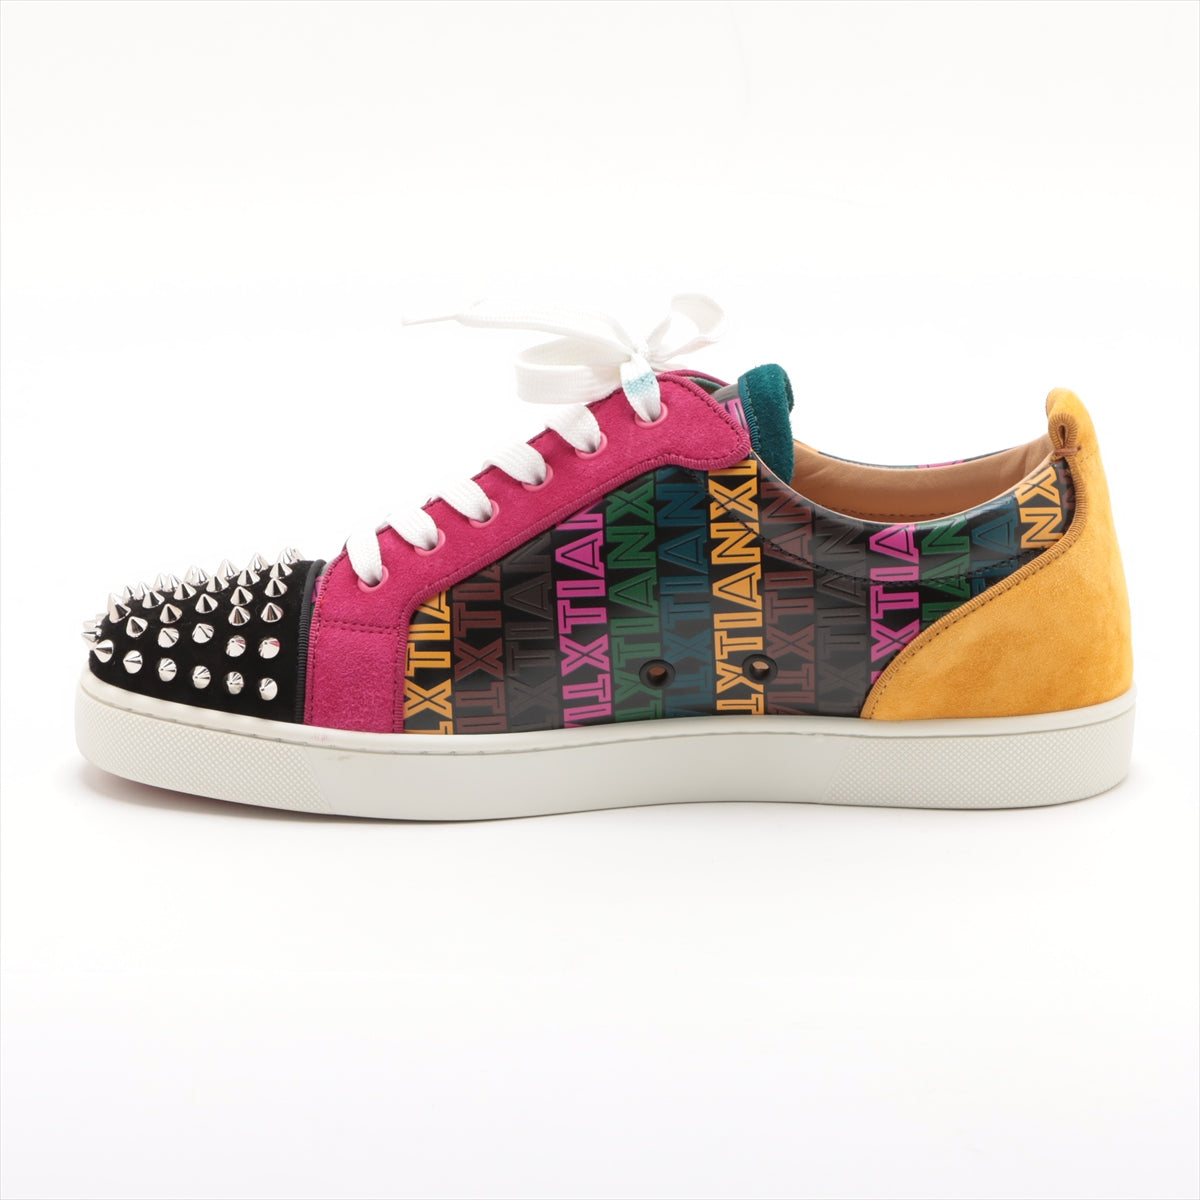 Christian Louboutin Leather & Suede Sneakers 42 1/2 Men's Multicolor LOUIS JUNIOR SPIKES ORLATO Spike Studs Replacement Laces Included